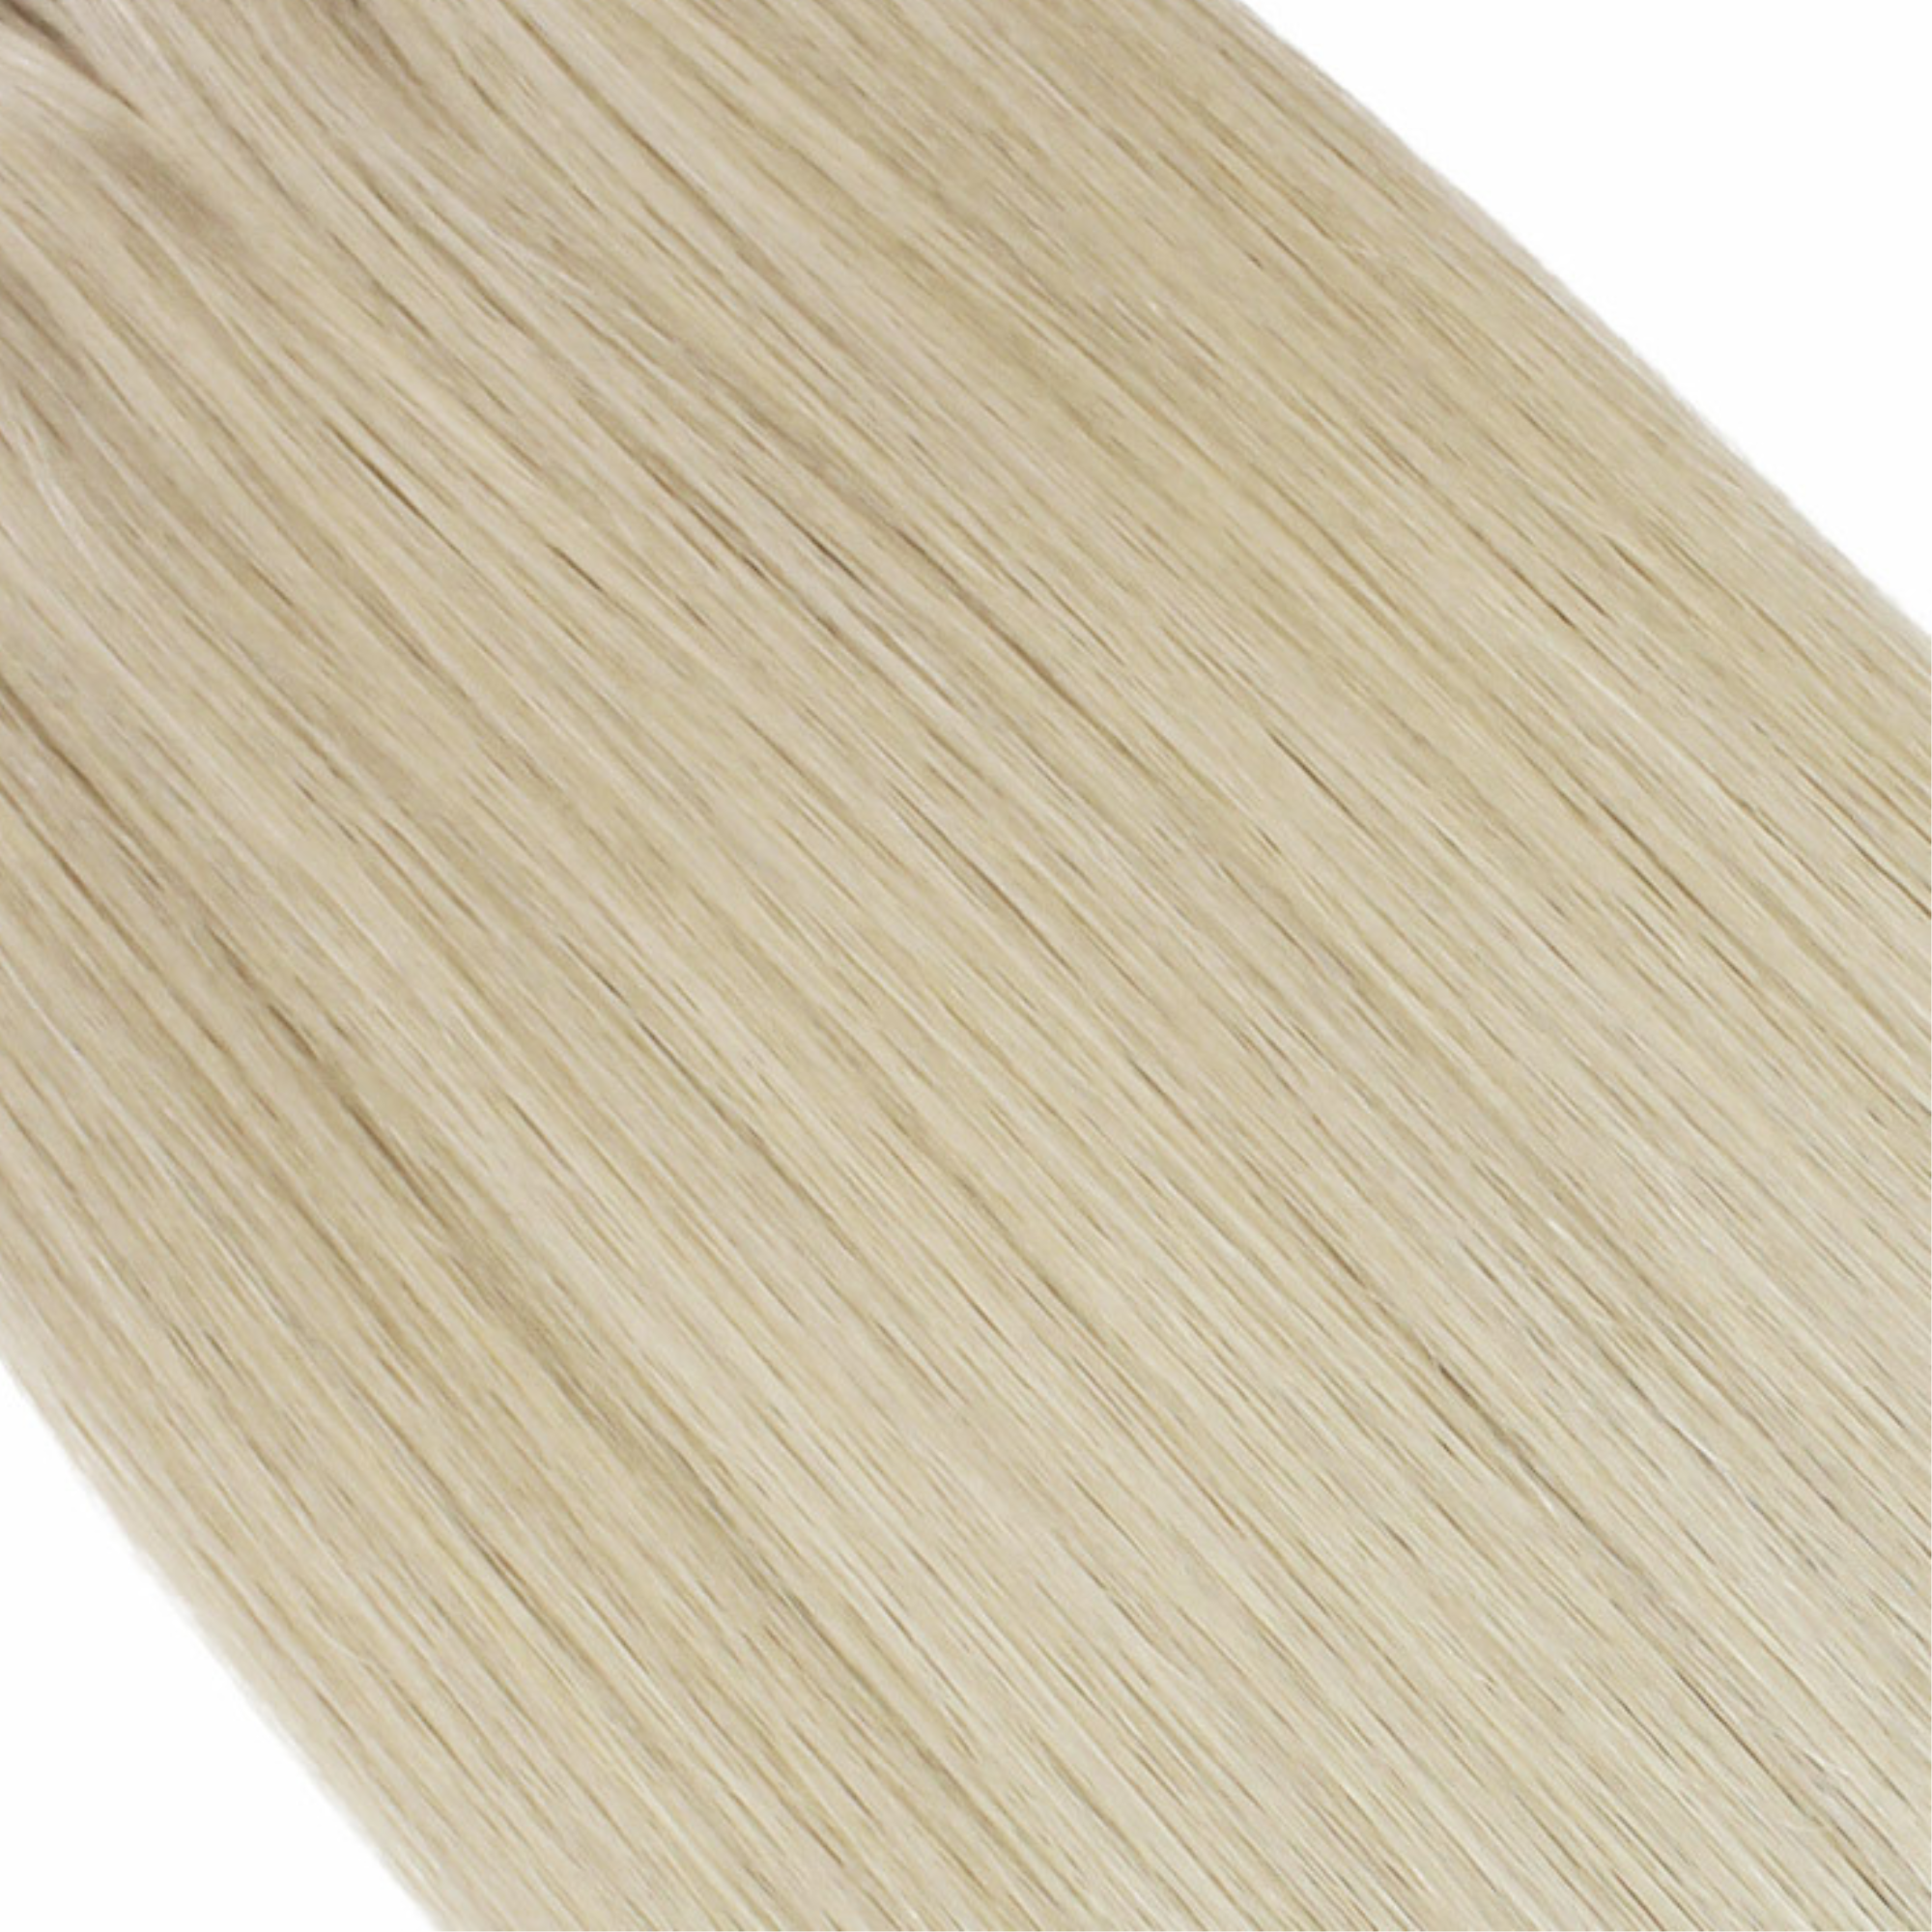 "hair rehab london 14" tape hair extensions shade swatch titled ice blonde"